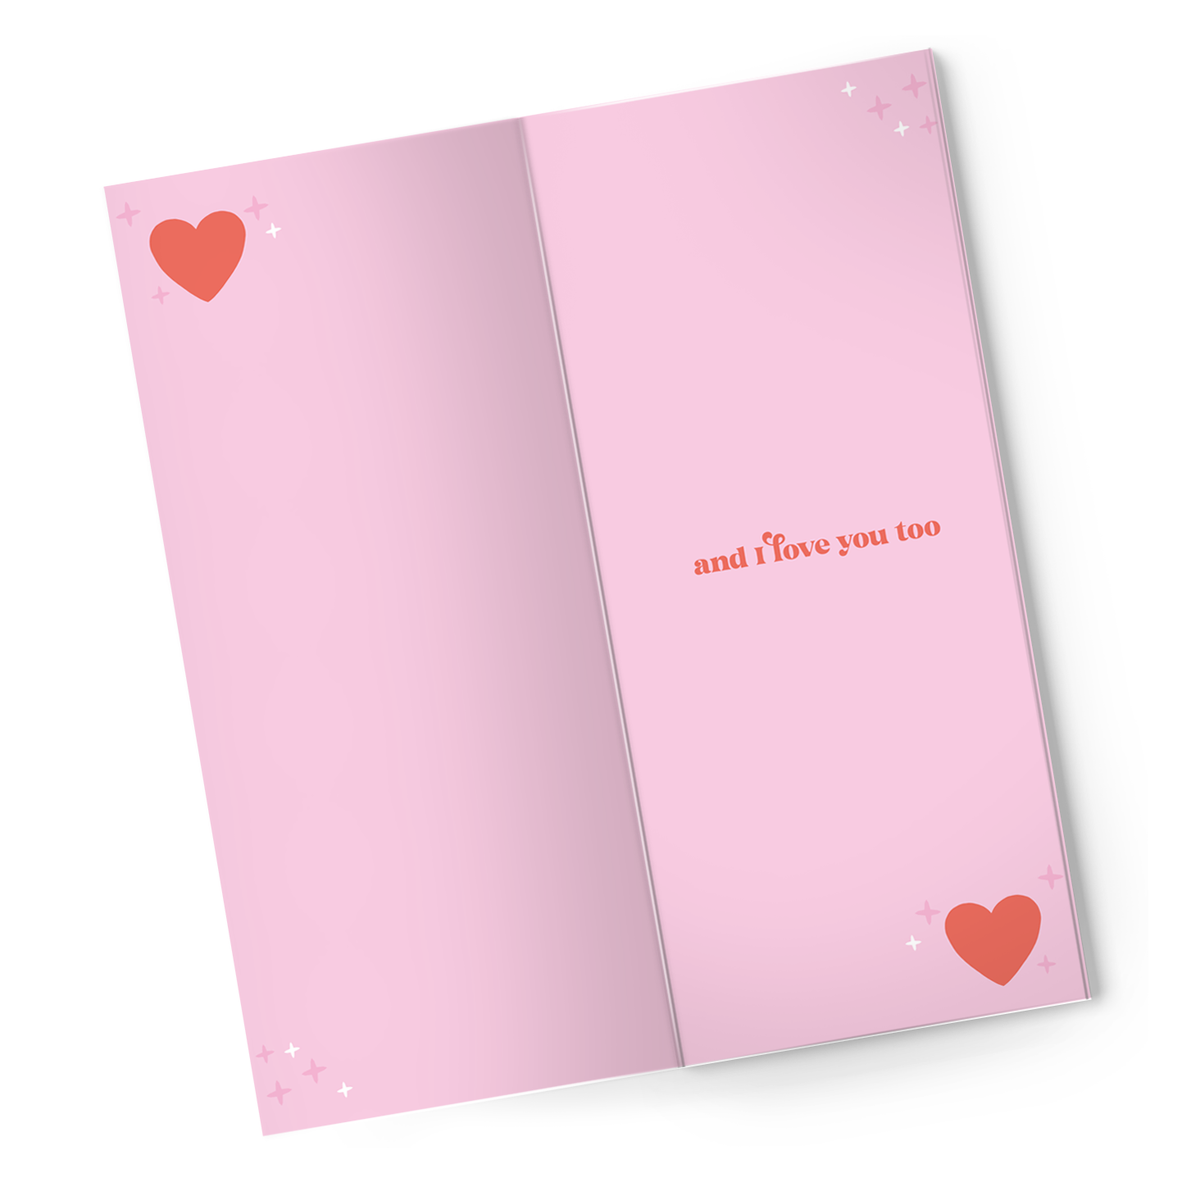 How Sweet It Is To Be Loved Card + Chocolate Bar